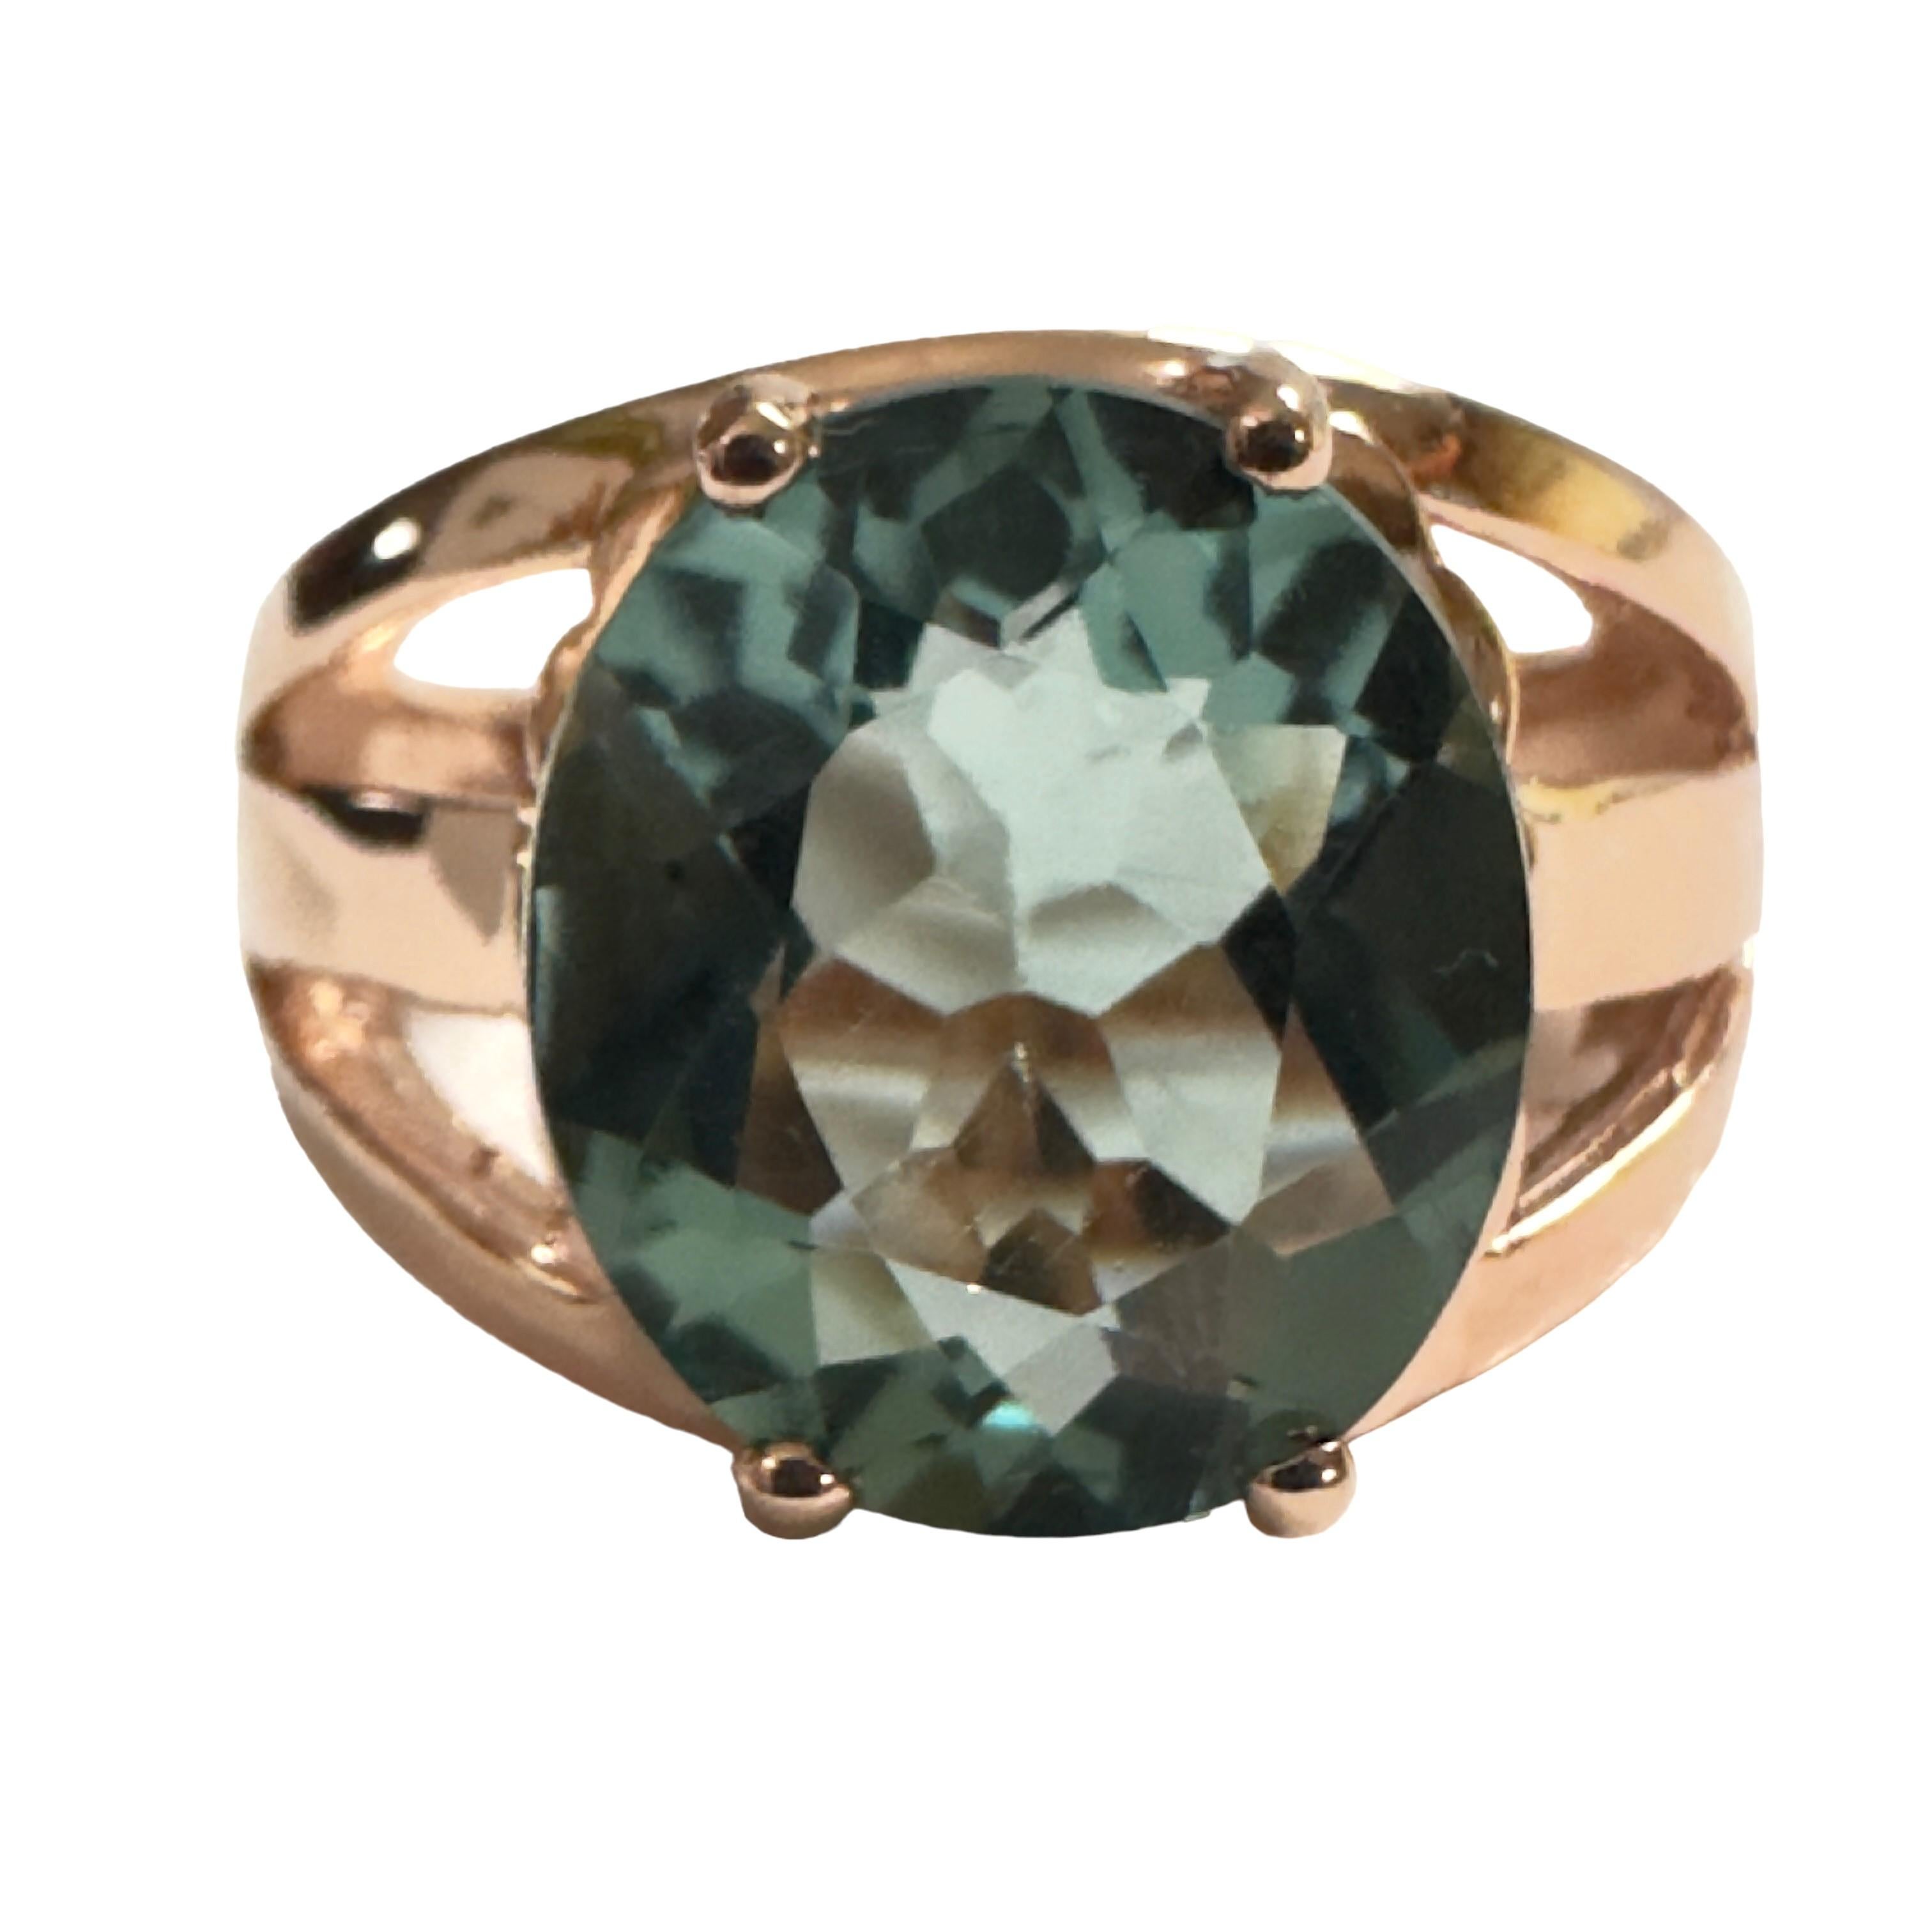 What a beautiful ring!  The ring is a size 6.5. This stone is from the Philippines. It is a beautiful oval cut stone and is 5.80 cts.  It's a very high quality stone.  The 